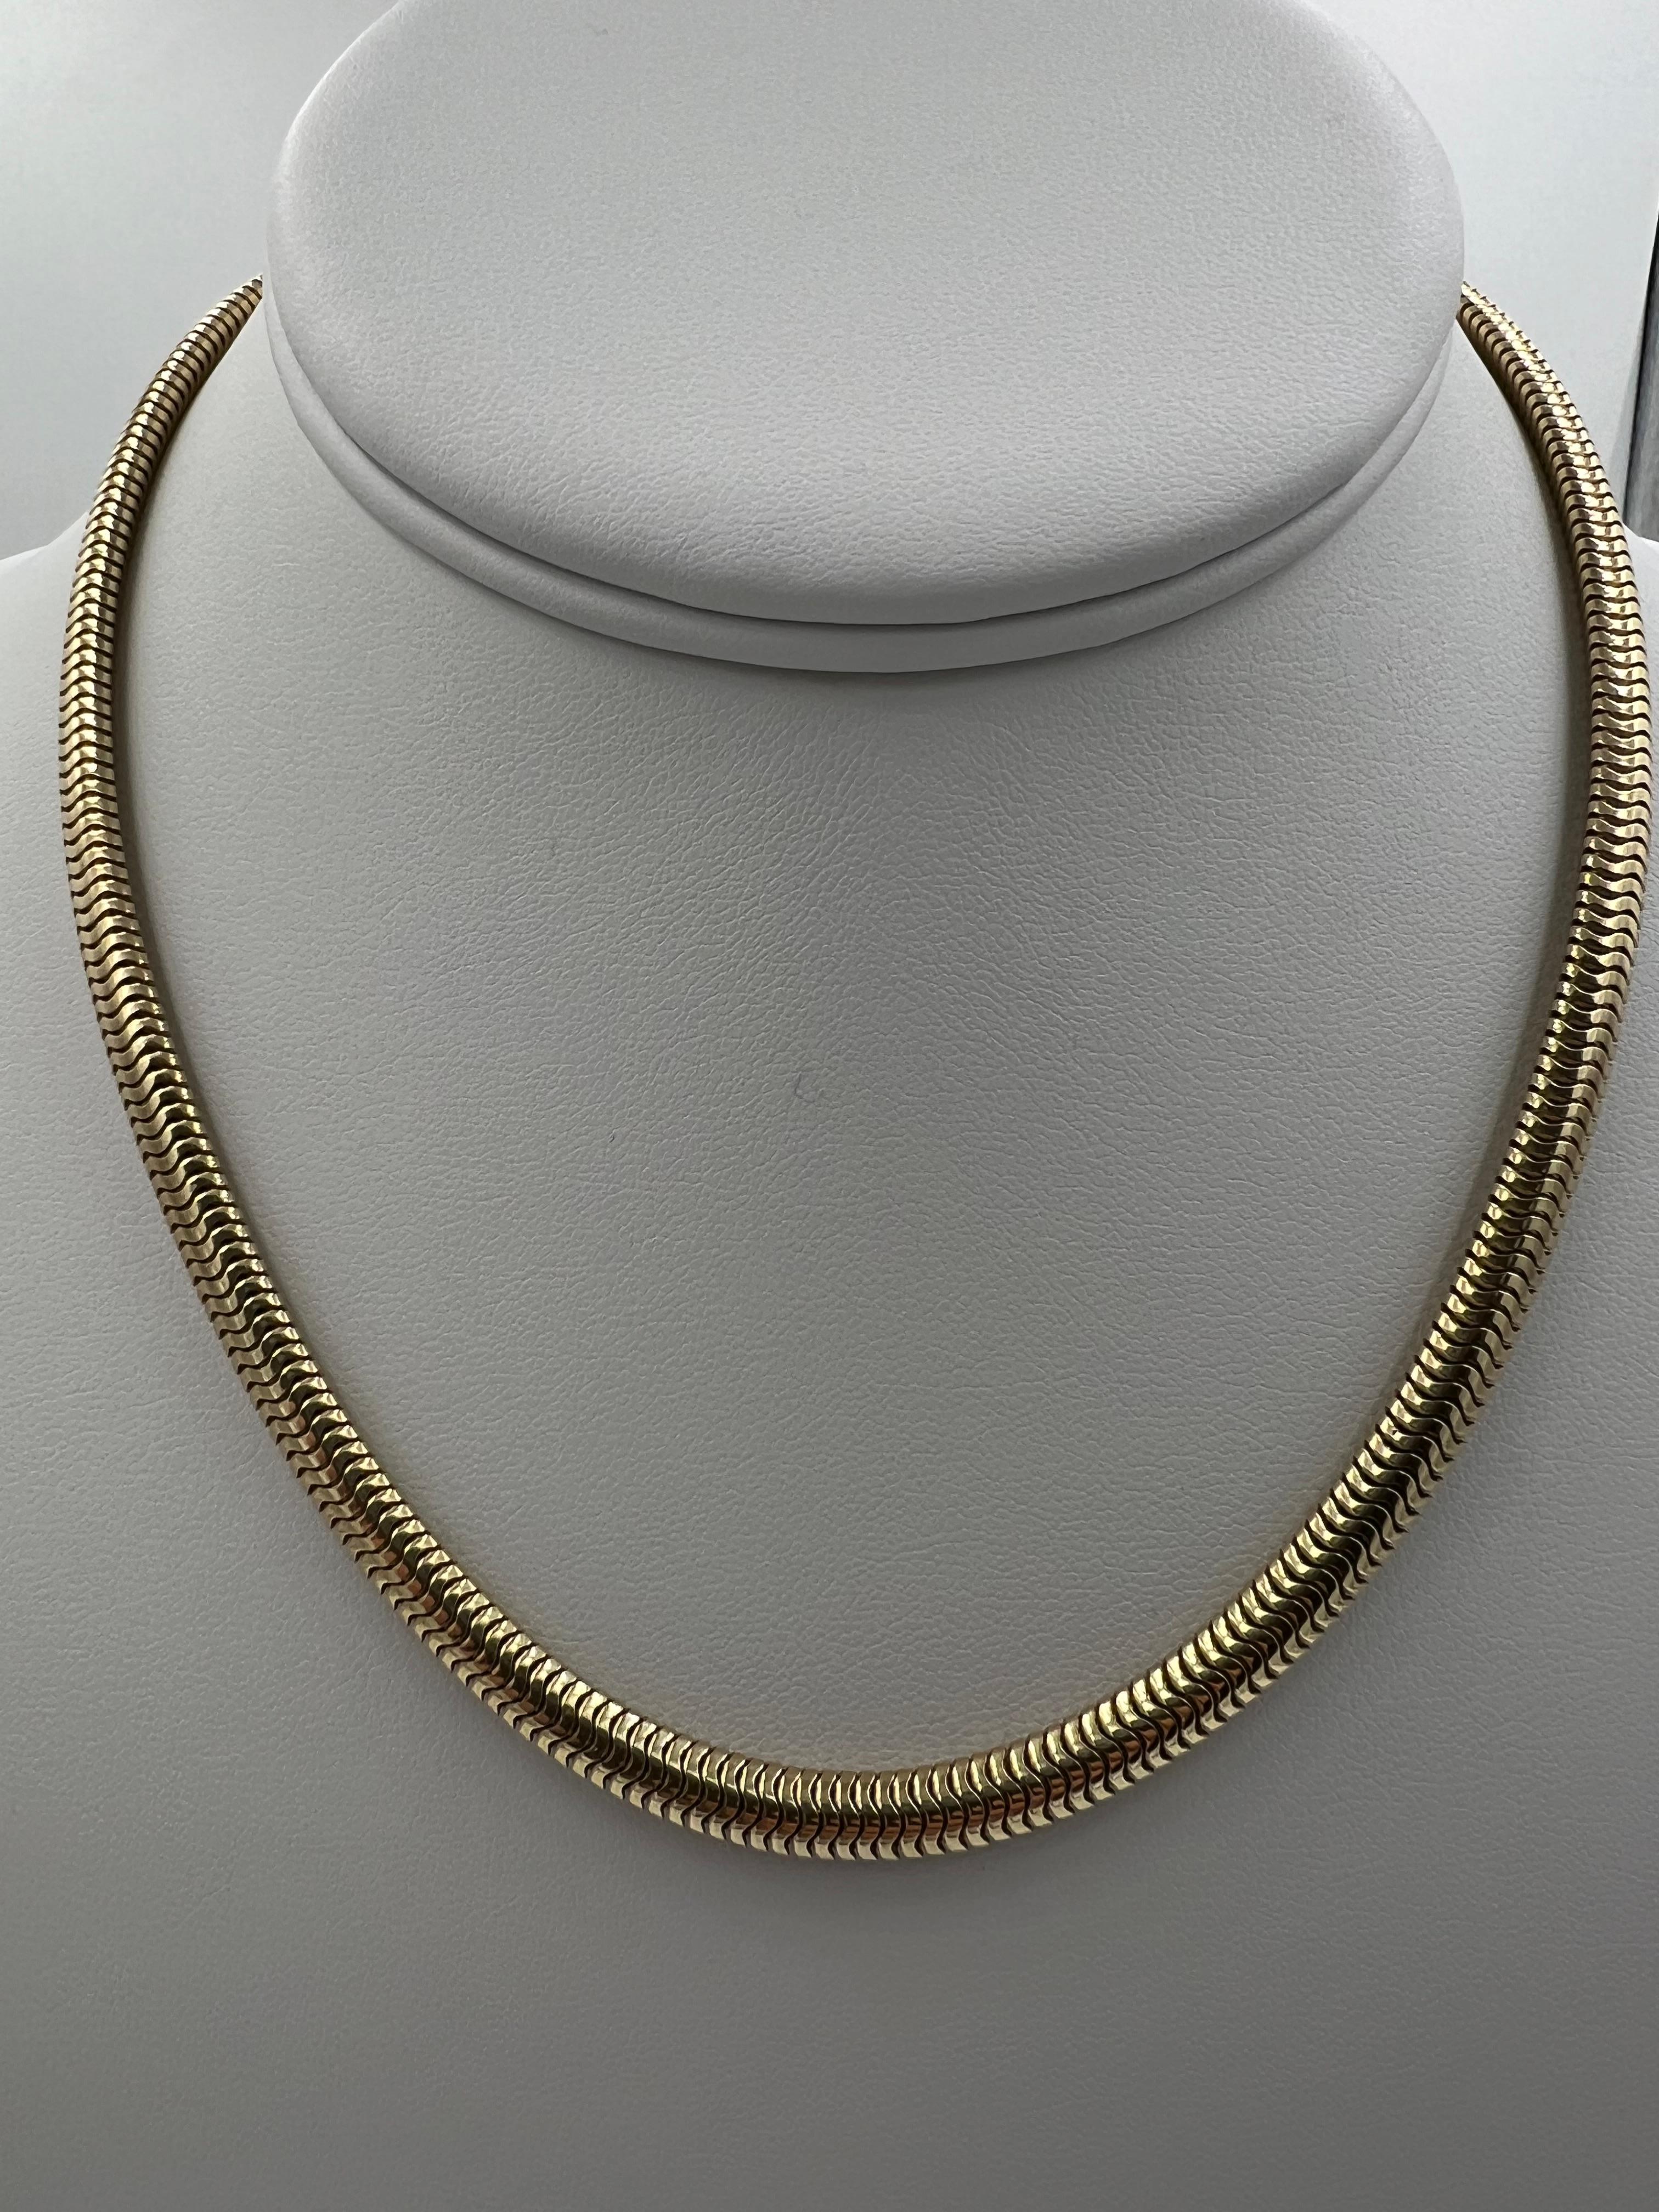 Snake chain yellow gold necklace, circa 1950s. 
  This vintage snake chain yellow gold necklace is a timeless piece of jewelry. Crafted from luxurious 14k yellow gold, this necklace features a unique oval snake chain design which can be worn alone